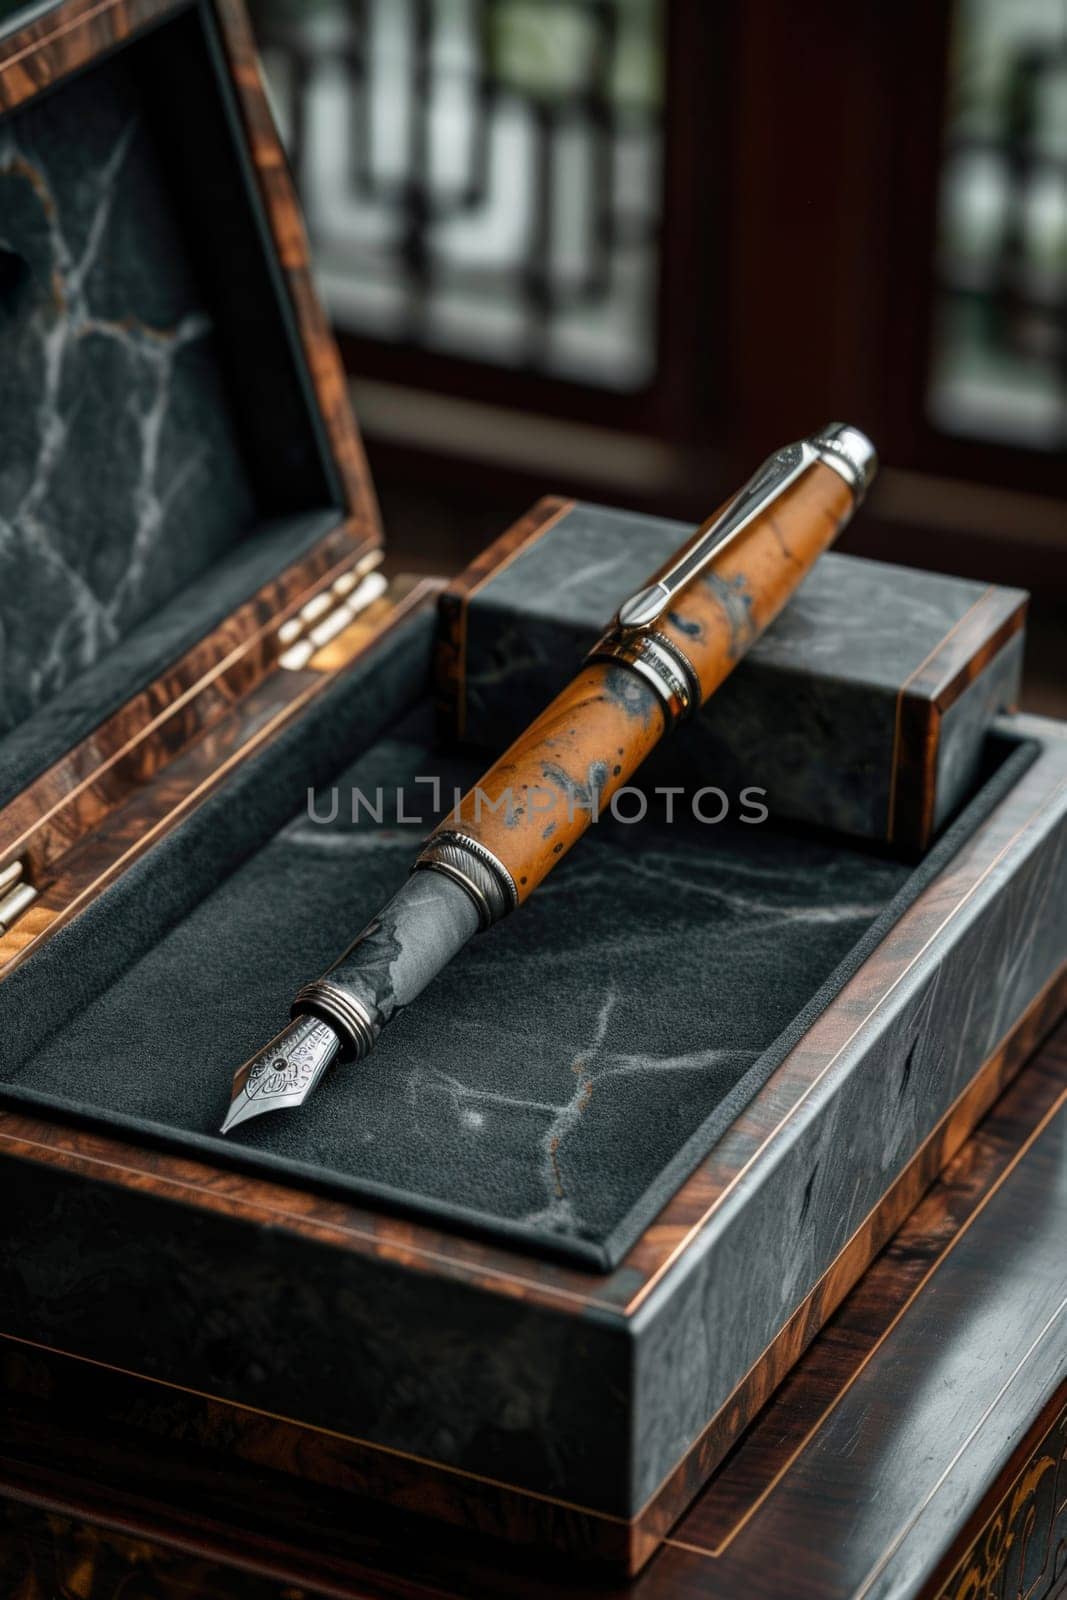 stylish fountain pen with a stylish box on the table.